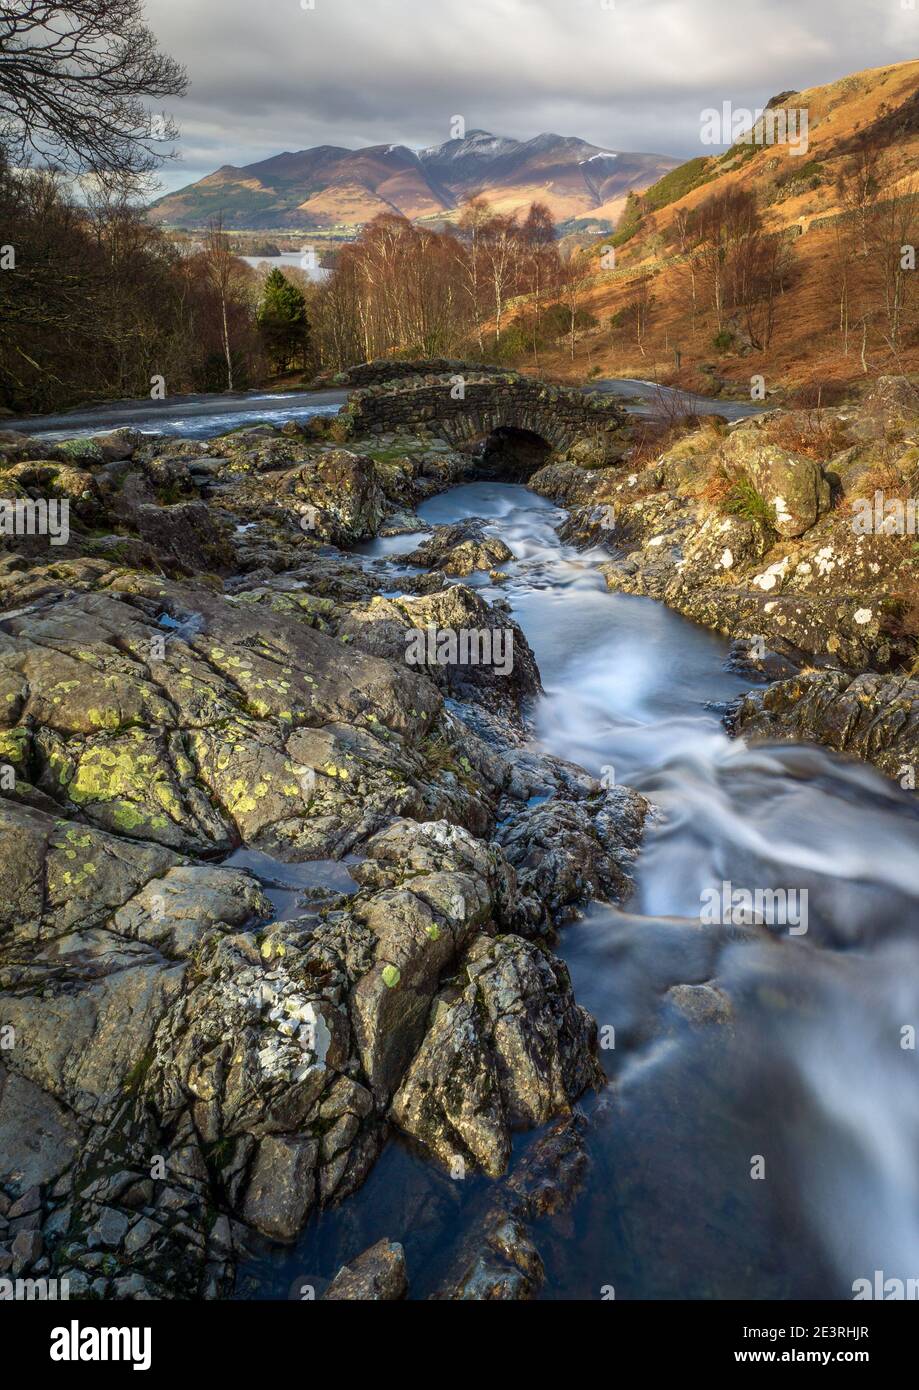 Barrow Beck tumbles down the Ashness Fells towards Derwent Water under Ashness Bridge, with the Skiddaw Massif visible on the horizon. Stock Photo